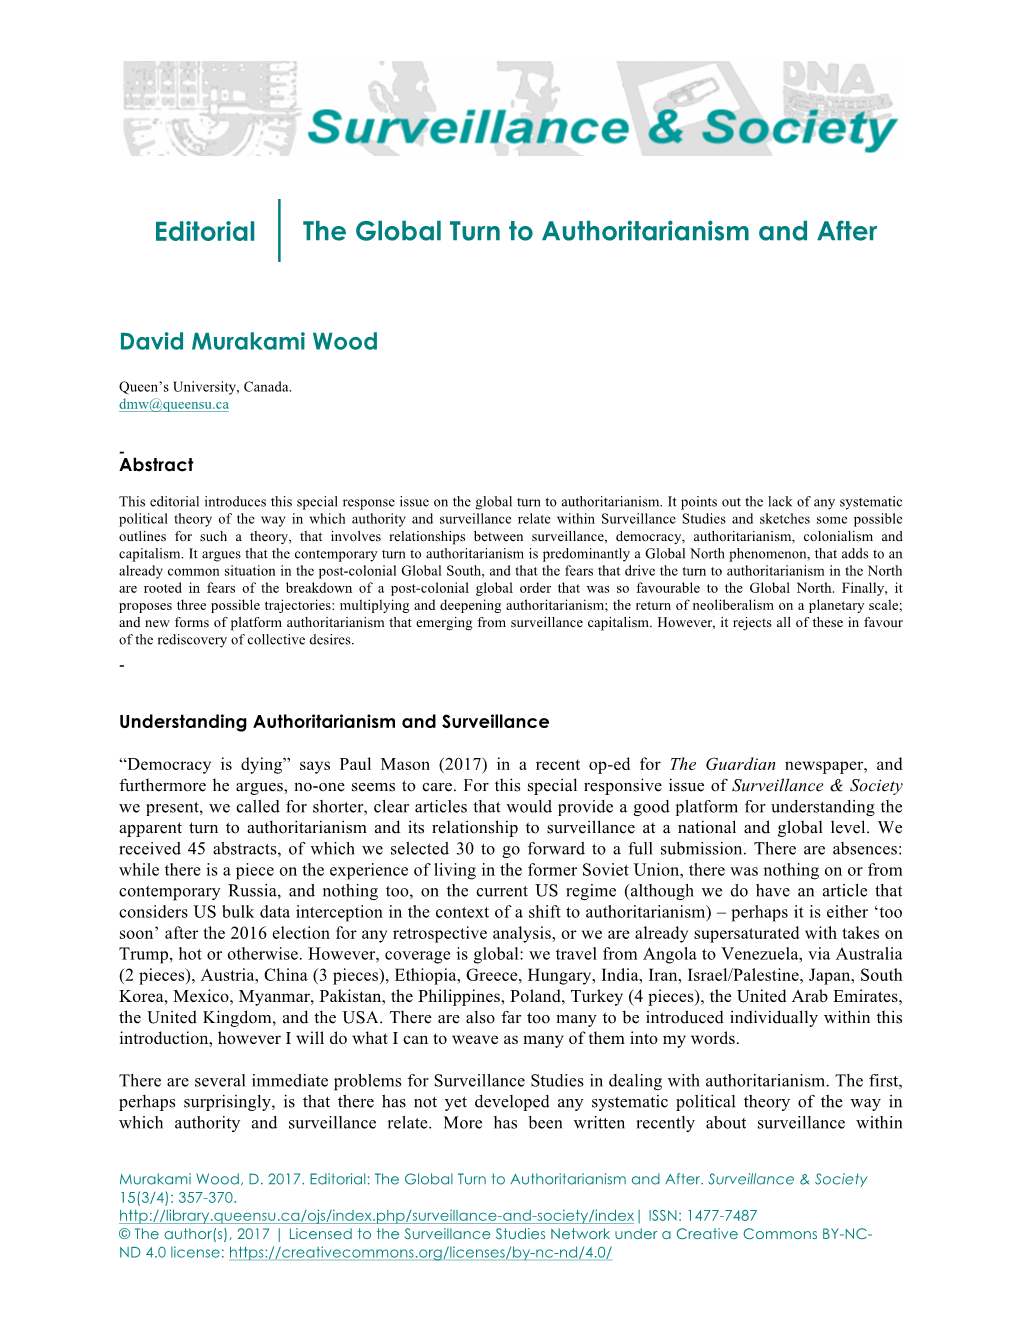 Editorial the Global Turn to Authoritarianism and After